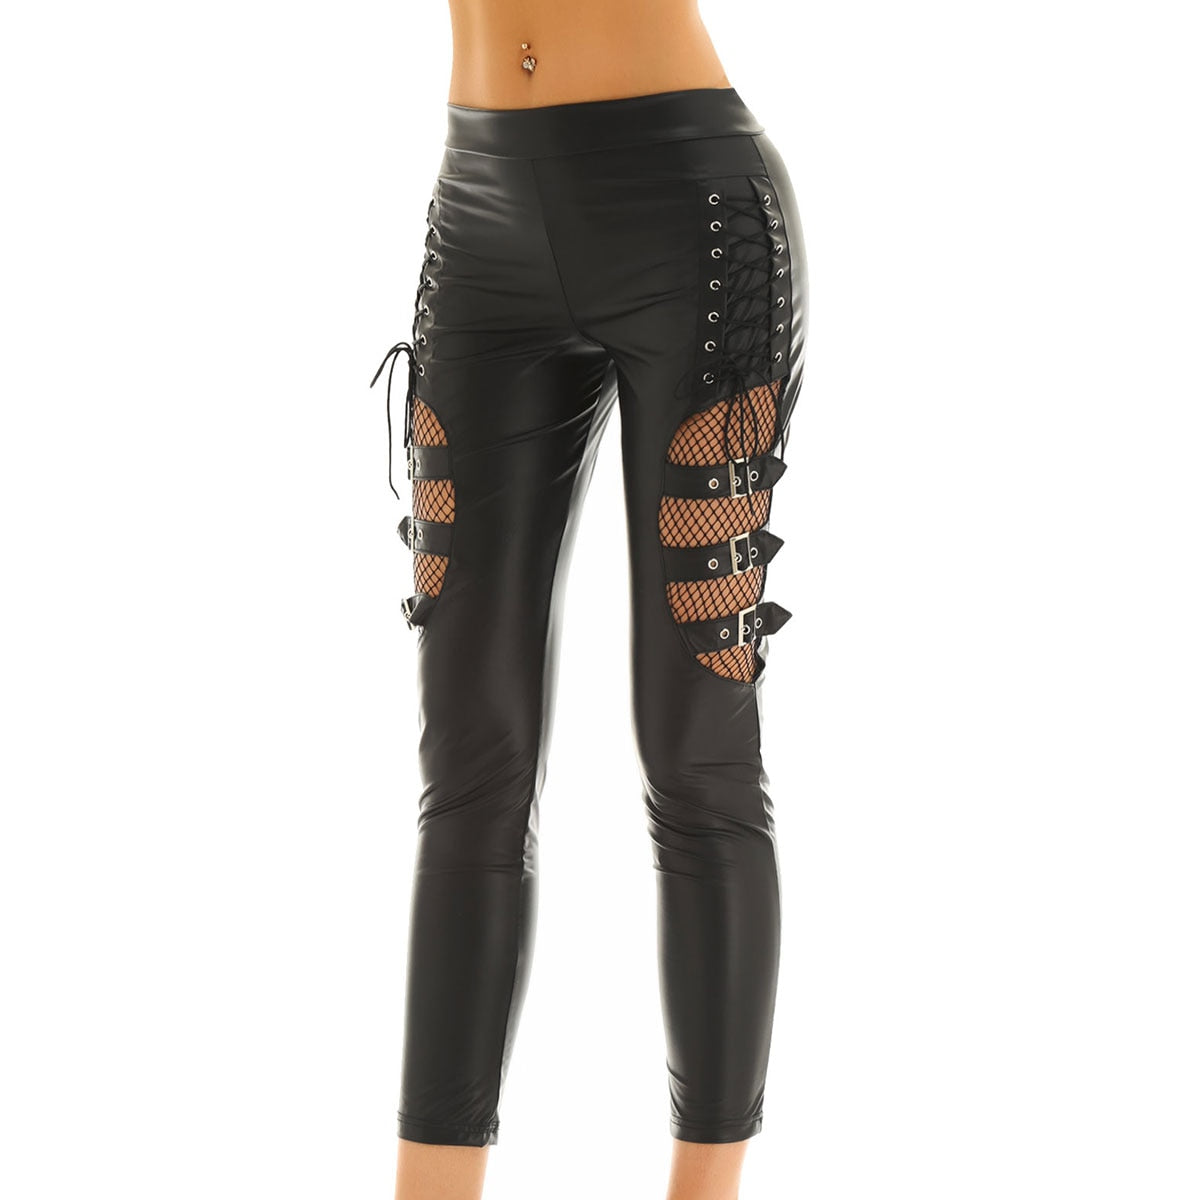 wet look faux leather fishnet stretchy legging trousers